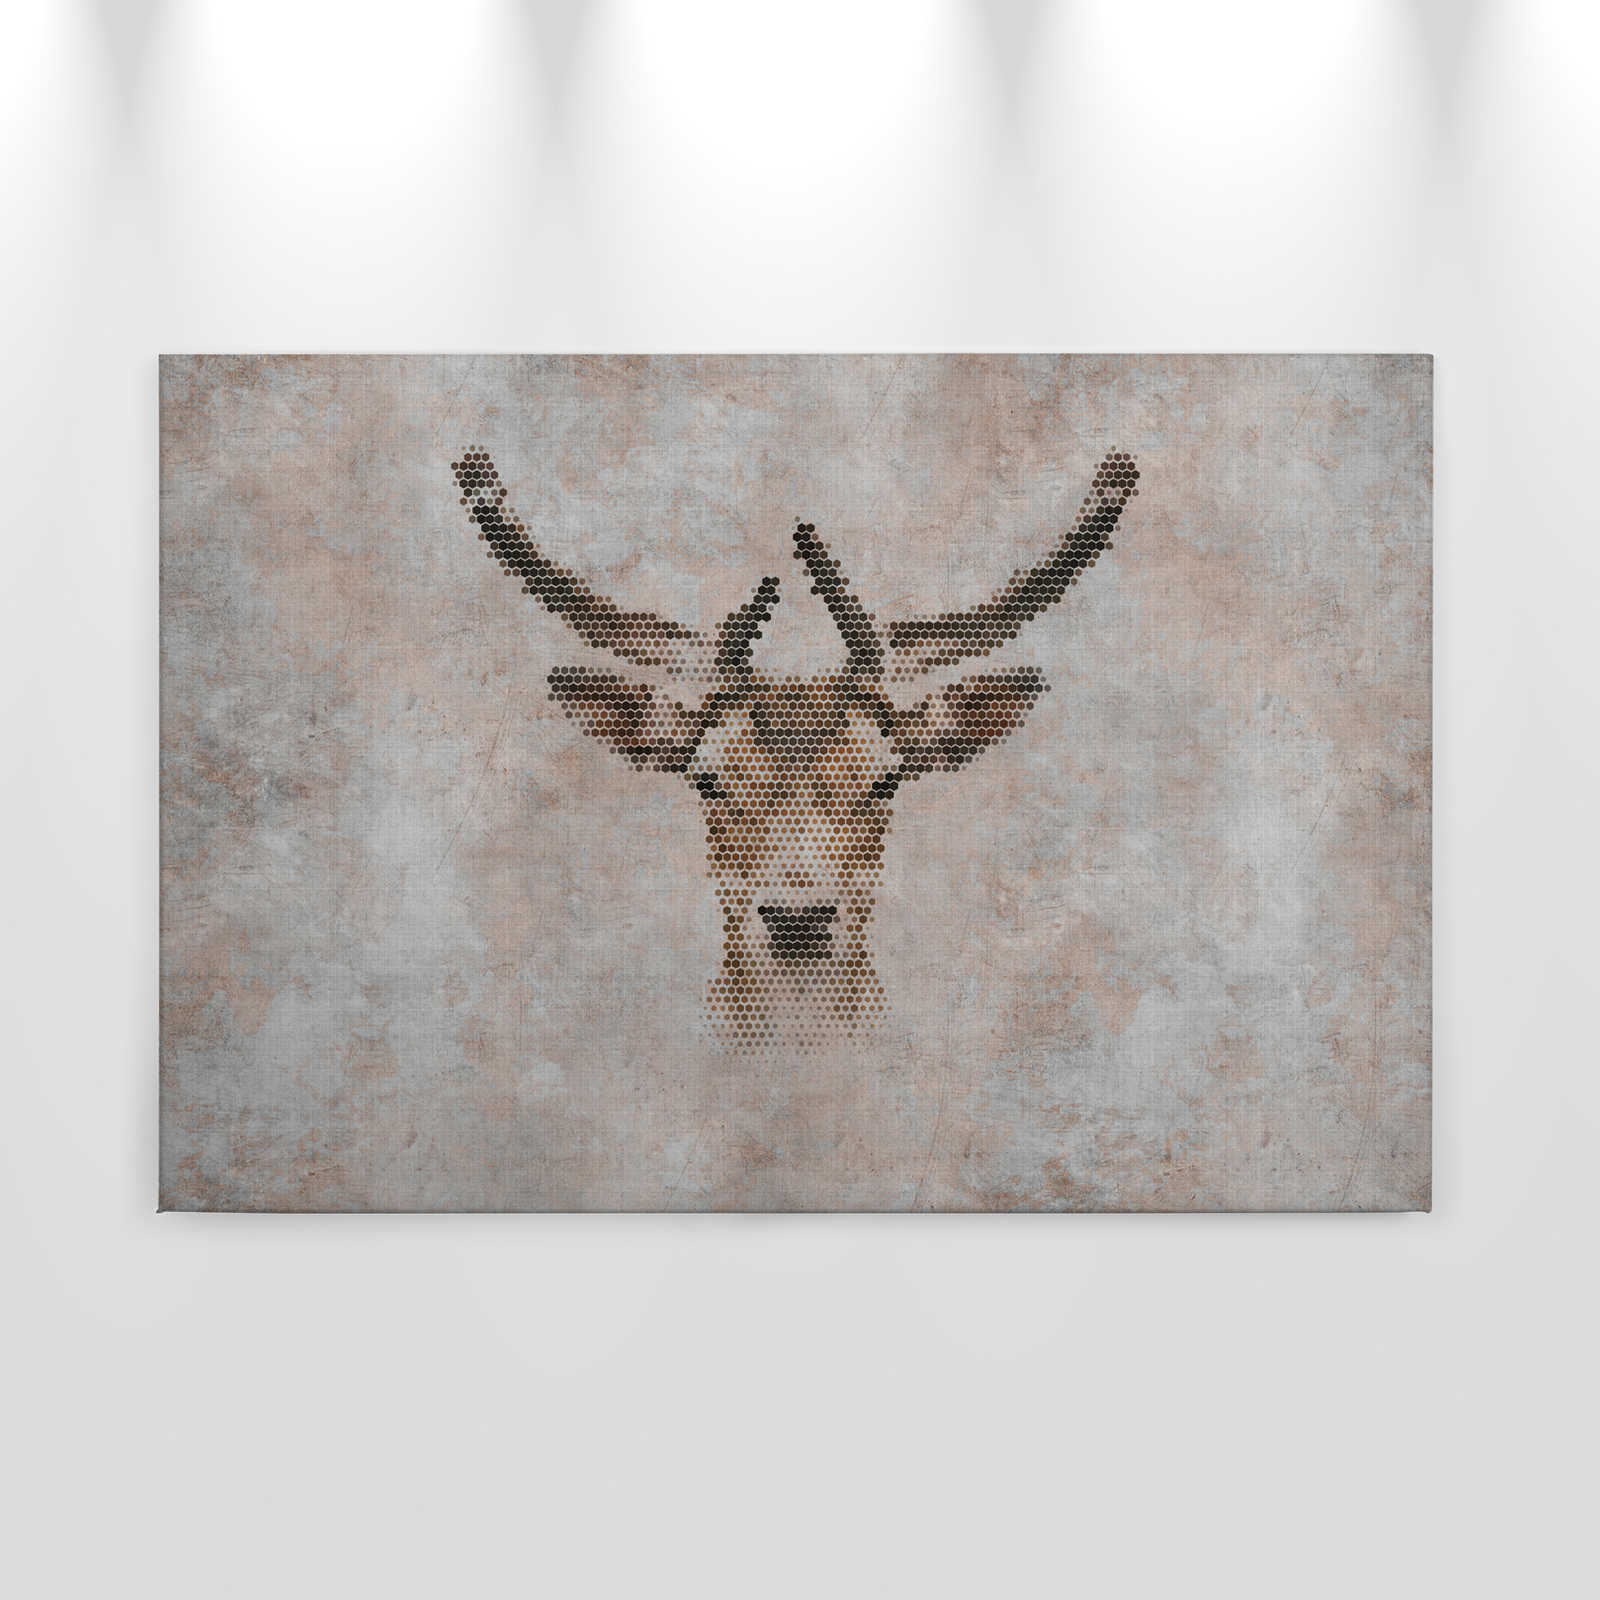             Big three 3 - Canvas painting, concrete look with deer in natural linen structure - 0.90 m x 0.60 m
        